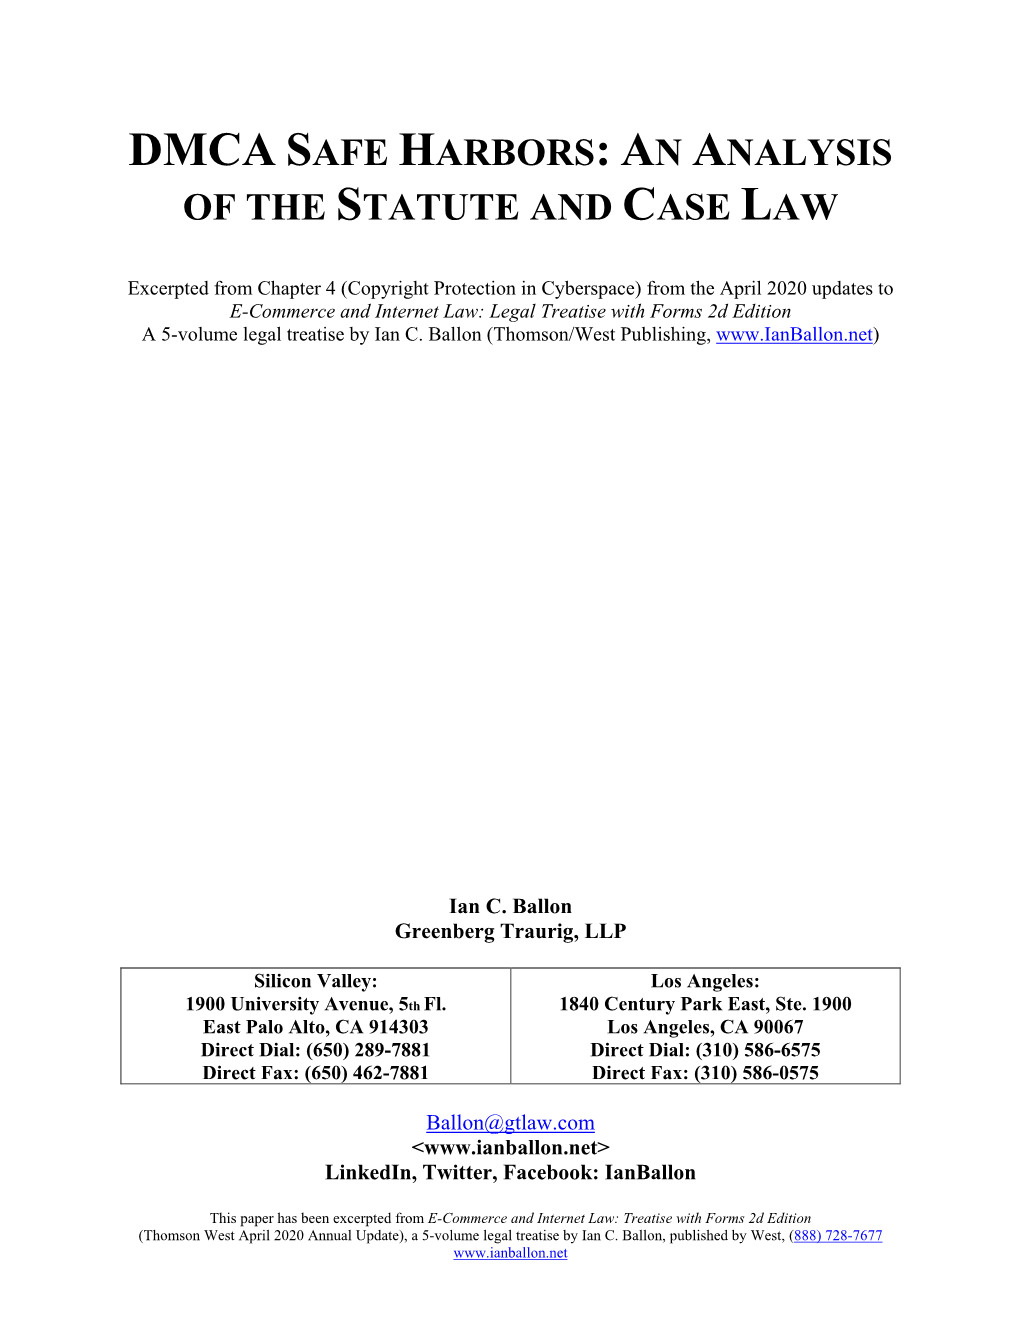 Dmca Safe Harbors: an Analysis of the Statute and Case Law